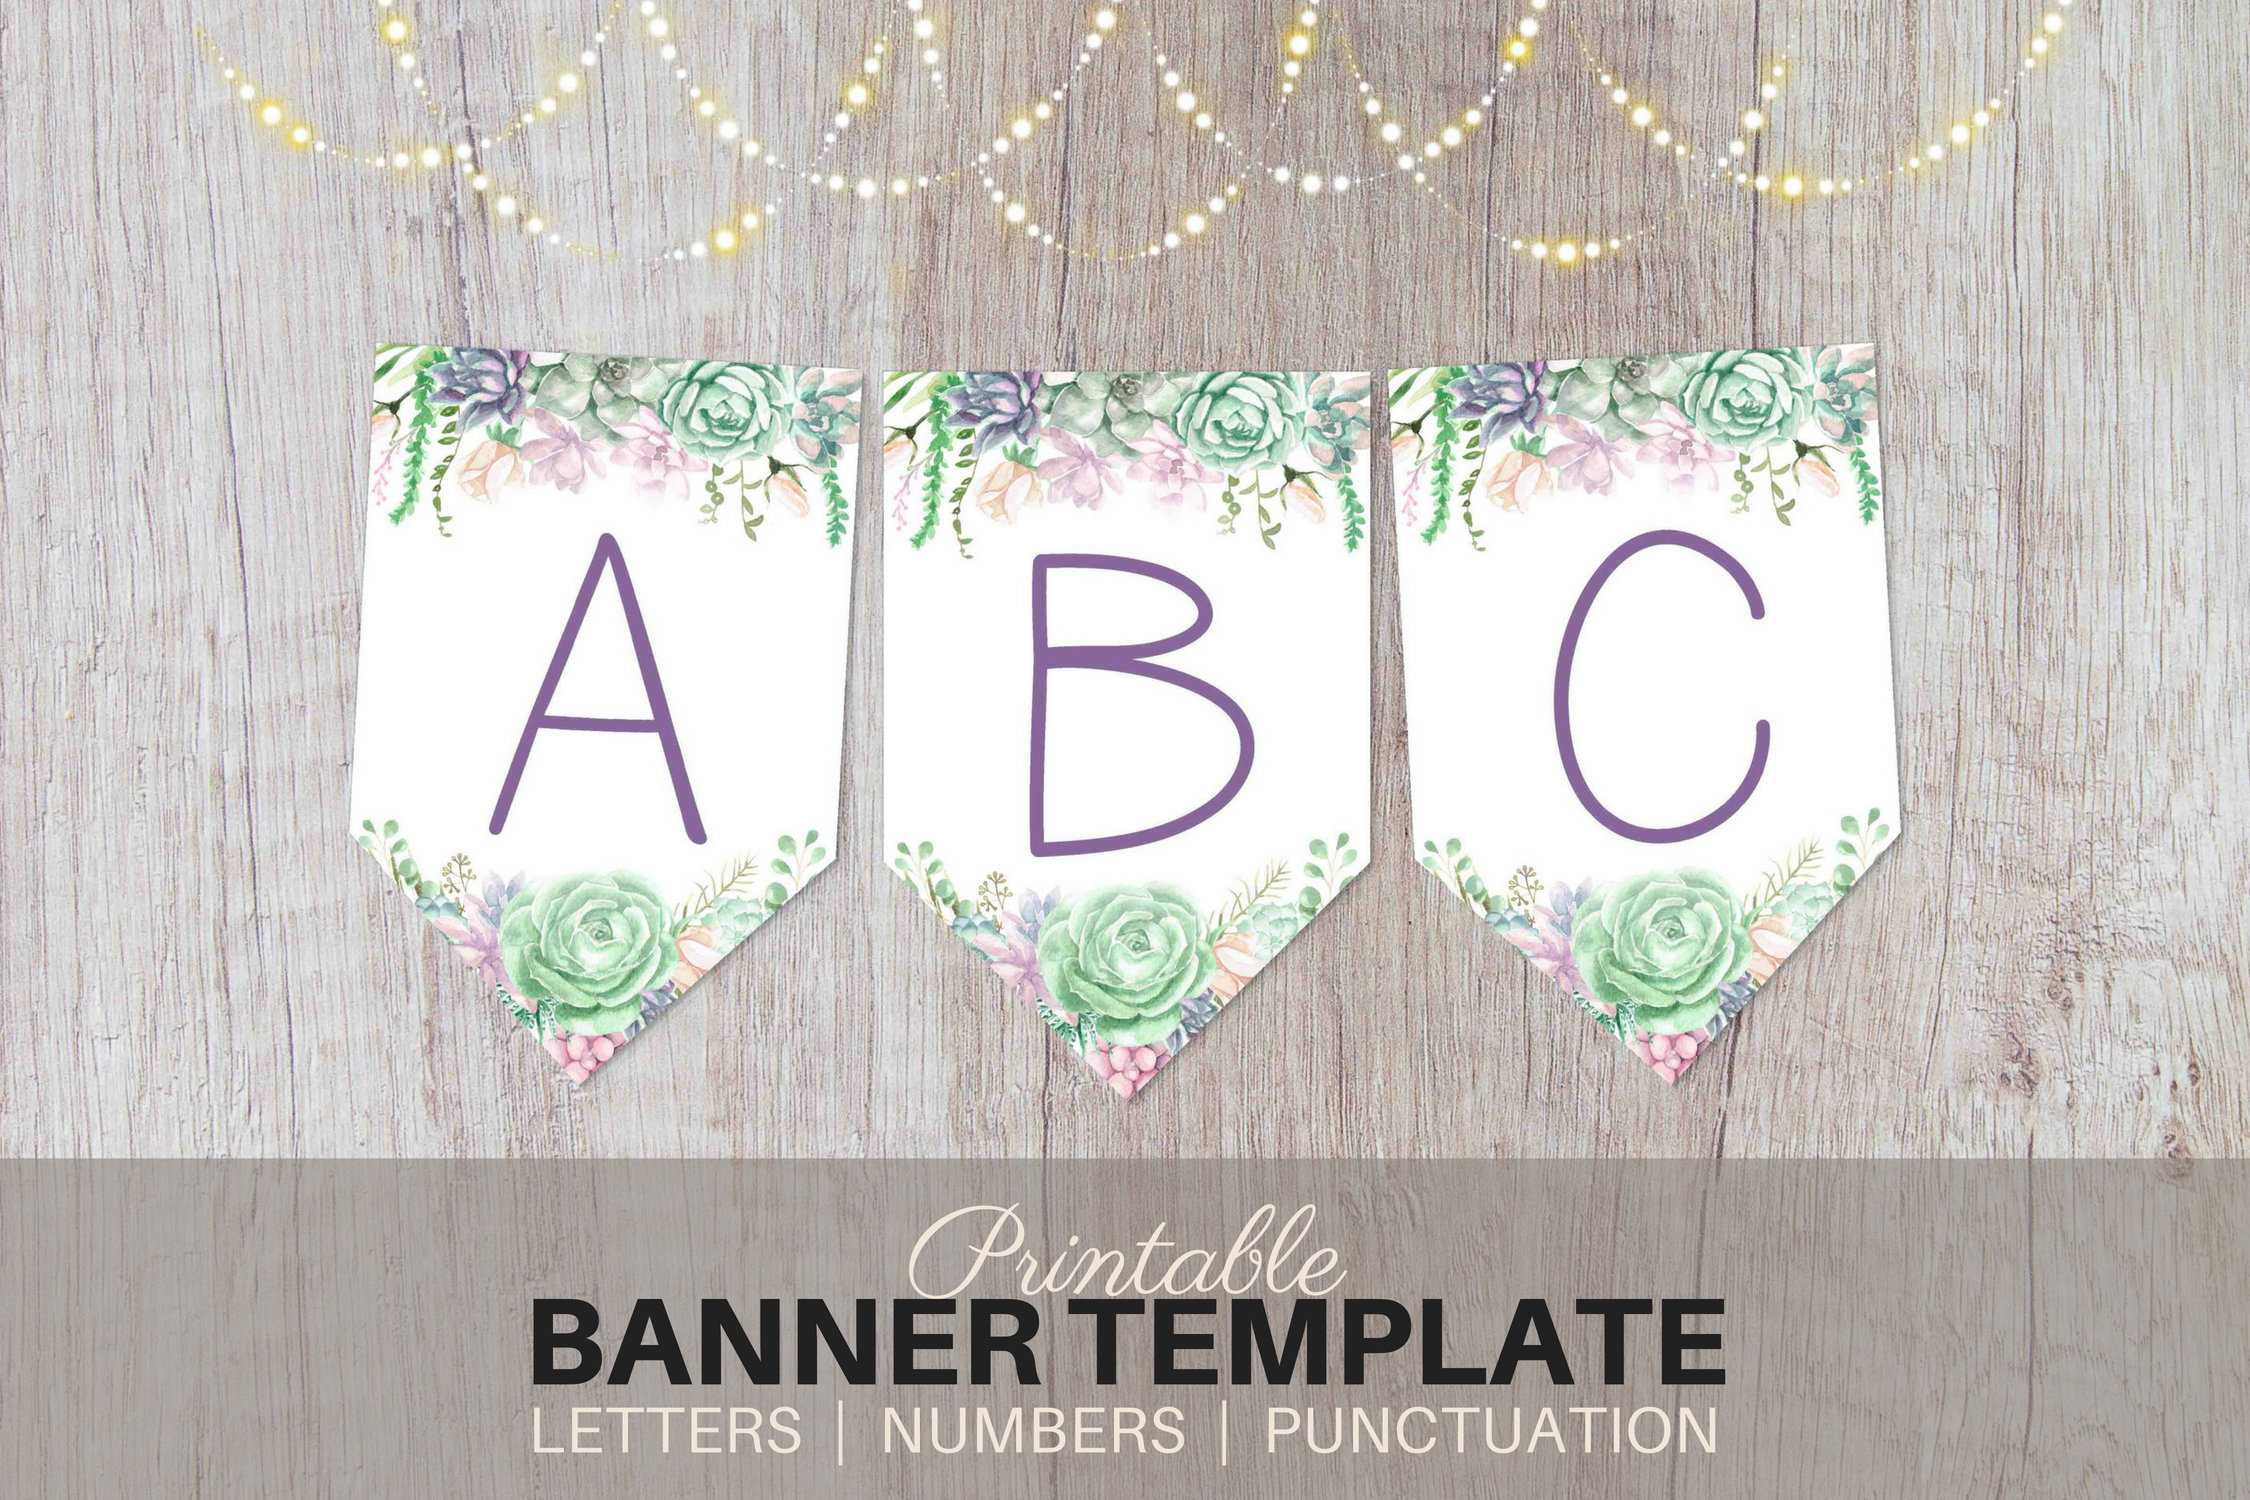 Printable Banner Template – Watercolor Succulents – Editable Printable  Banner Letters Pdf Bridal Shower, Birthday, Baby Shower, Party Banner Throughout Bridal Shower Banner Template